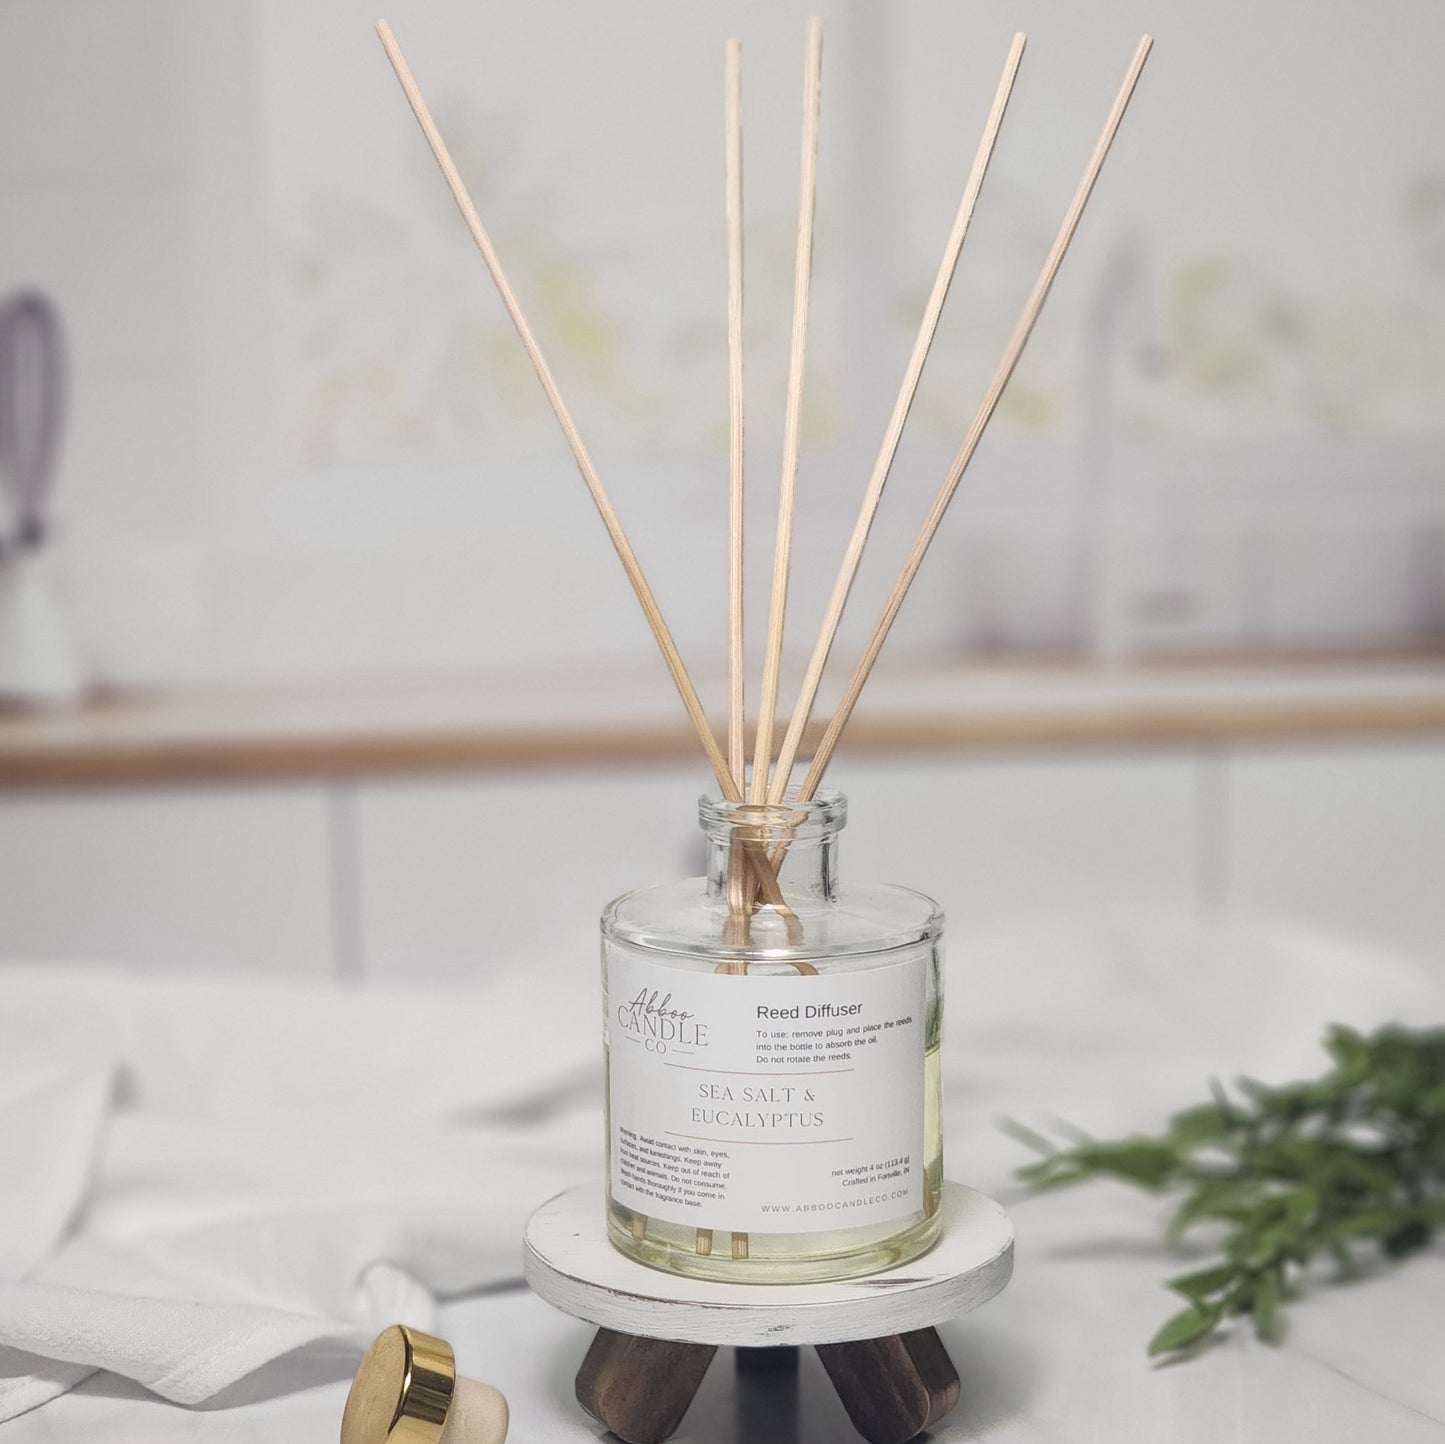 Reed Diffuser Home Fragrance - Sea Salt and Eucalyptus - Abboo Candle Co